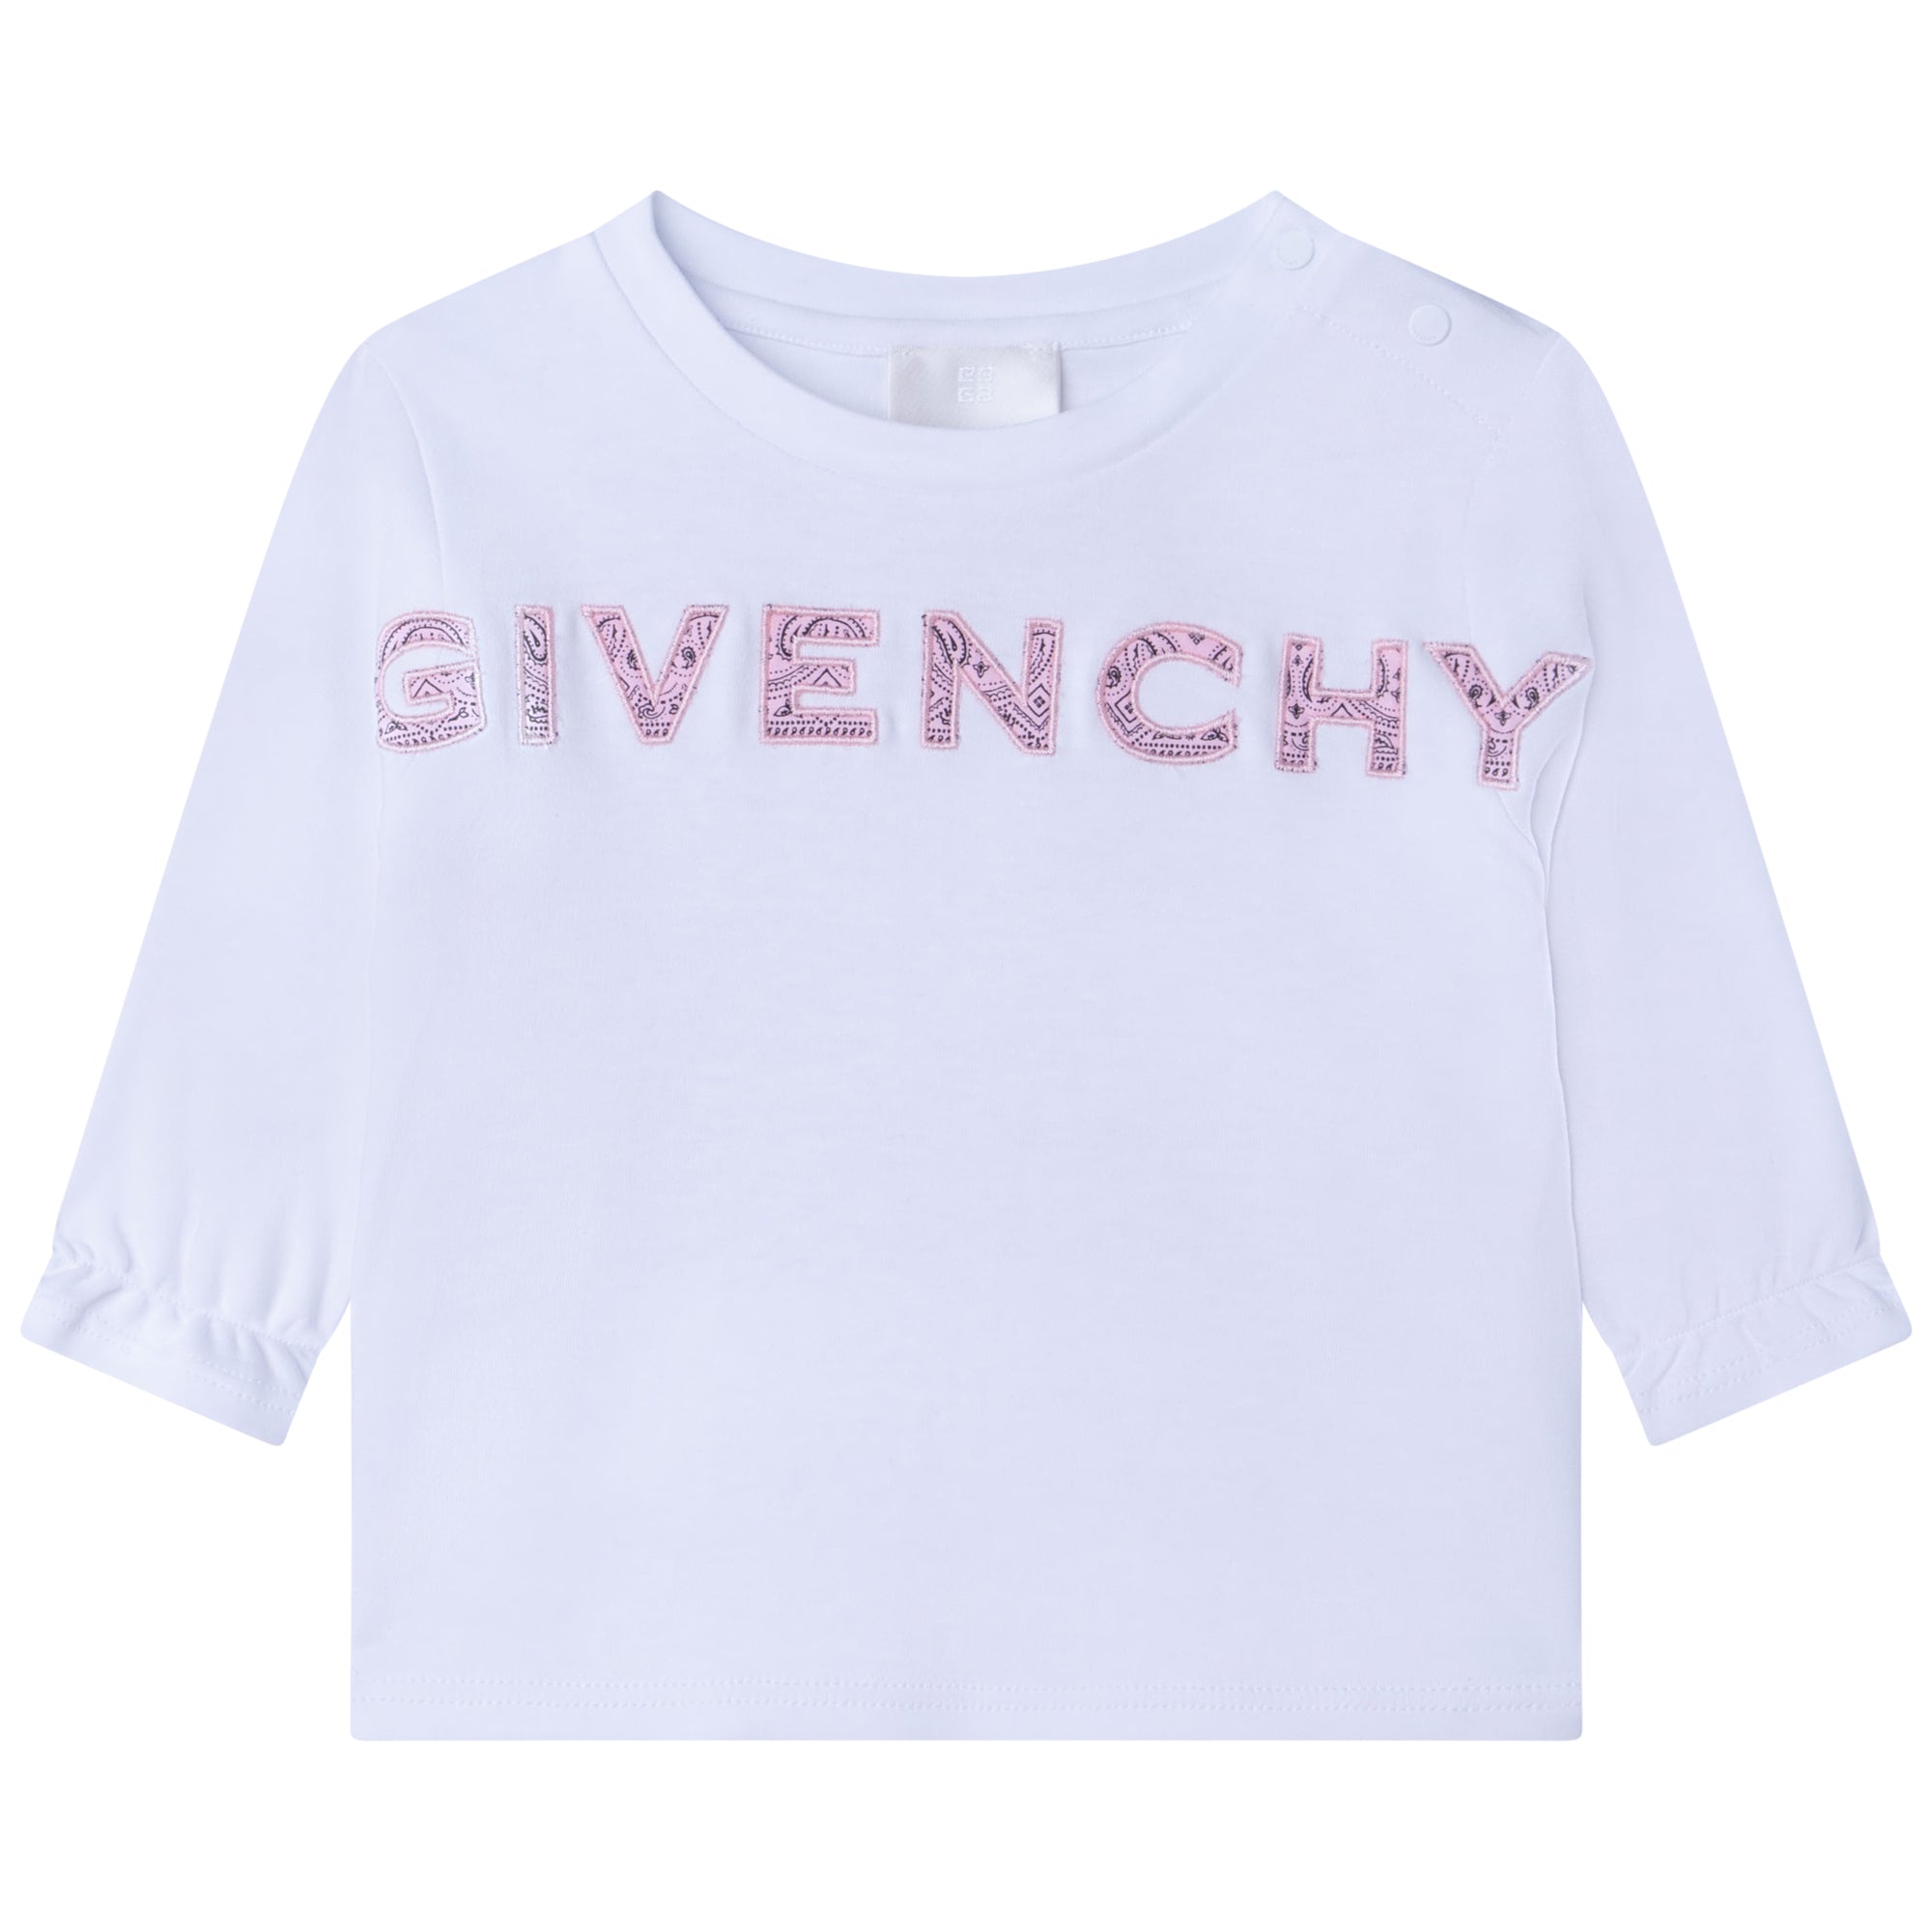 Givenchy Long Sleeve T-Shirt Style: H05240